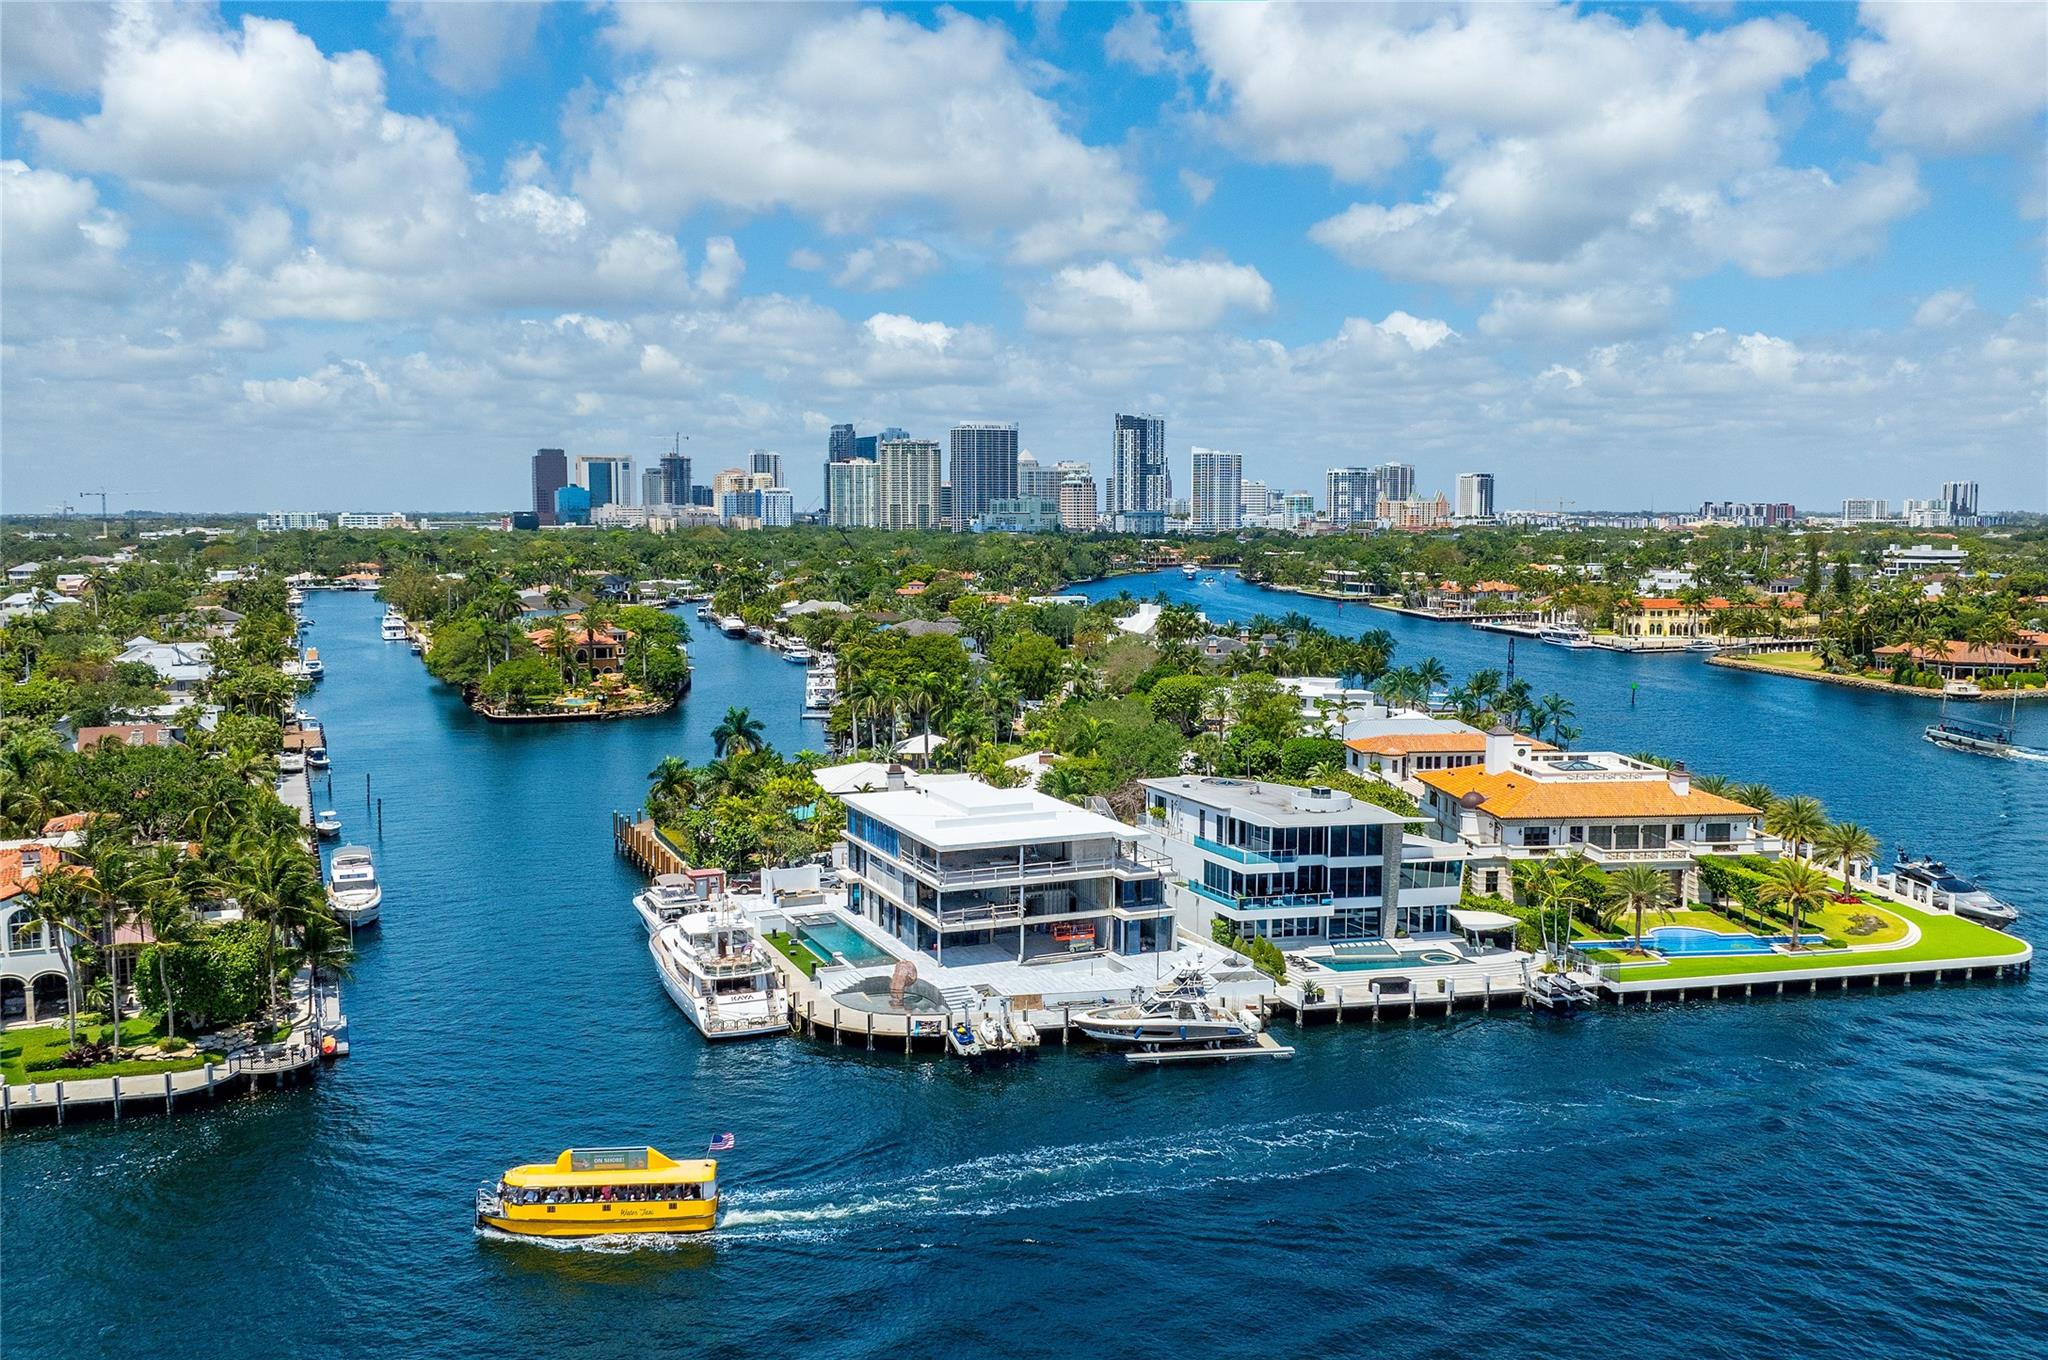 This ultra-luxurious waterfront Point Lot estate, in Fort Lauderdale's prestigious Rio Vista, offers the ultimate showcase of wide-open Intracoastal views! This stunning 3-story modern masterpiece spans 9,500+ sq. ft. of chic indoor living, is complemented by multiple private terraces for both sunrise & sunset enjoyment. Boasting 6 bedrooms; gourmet Chef's Kitchen; soaring volume ceiling in living room; office and clubroom; an indoor/outdoor primary bath; and third-floor Gym & Spa - this home has it all! With 255' of deep water dockage, you can accommodate your mega yacht while relishing the broadest Intracoastal panorama. While outdoors enjoying the views, soak in your custom glass facade pool, a summer kitchen & an array of water features! Just minutes to the ocean, beach and airport!